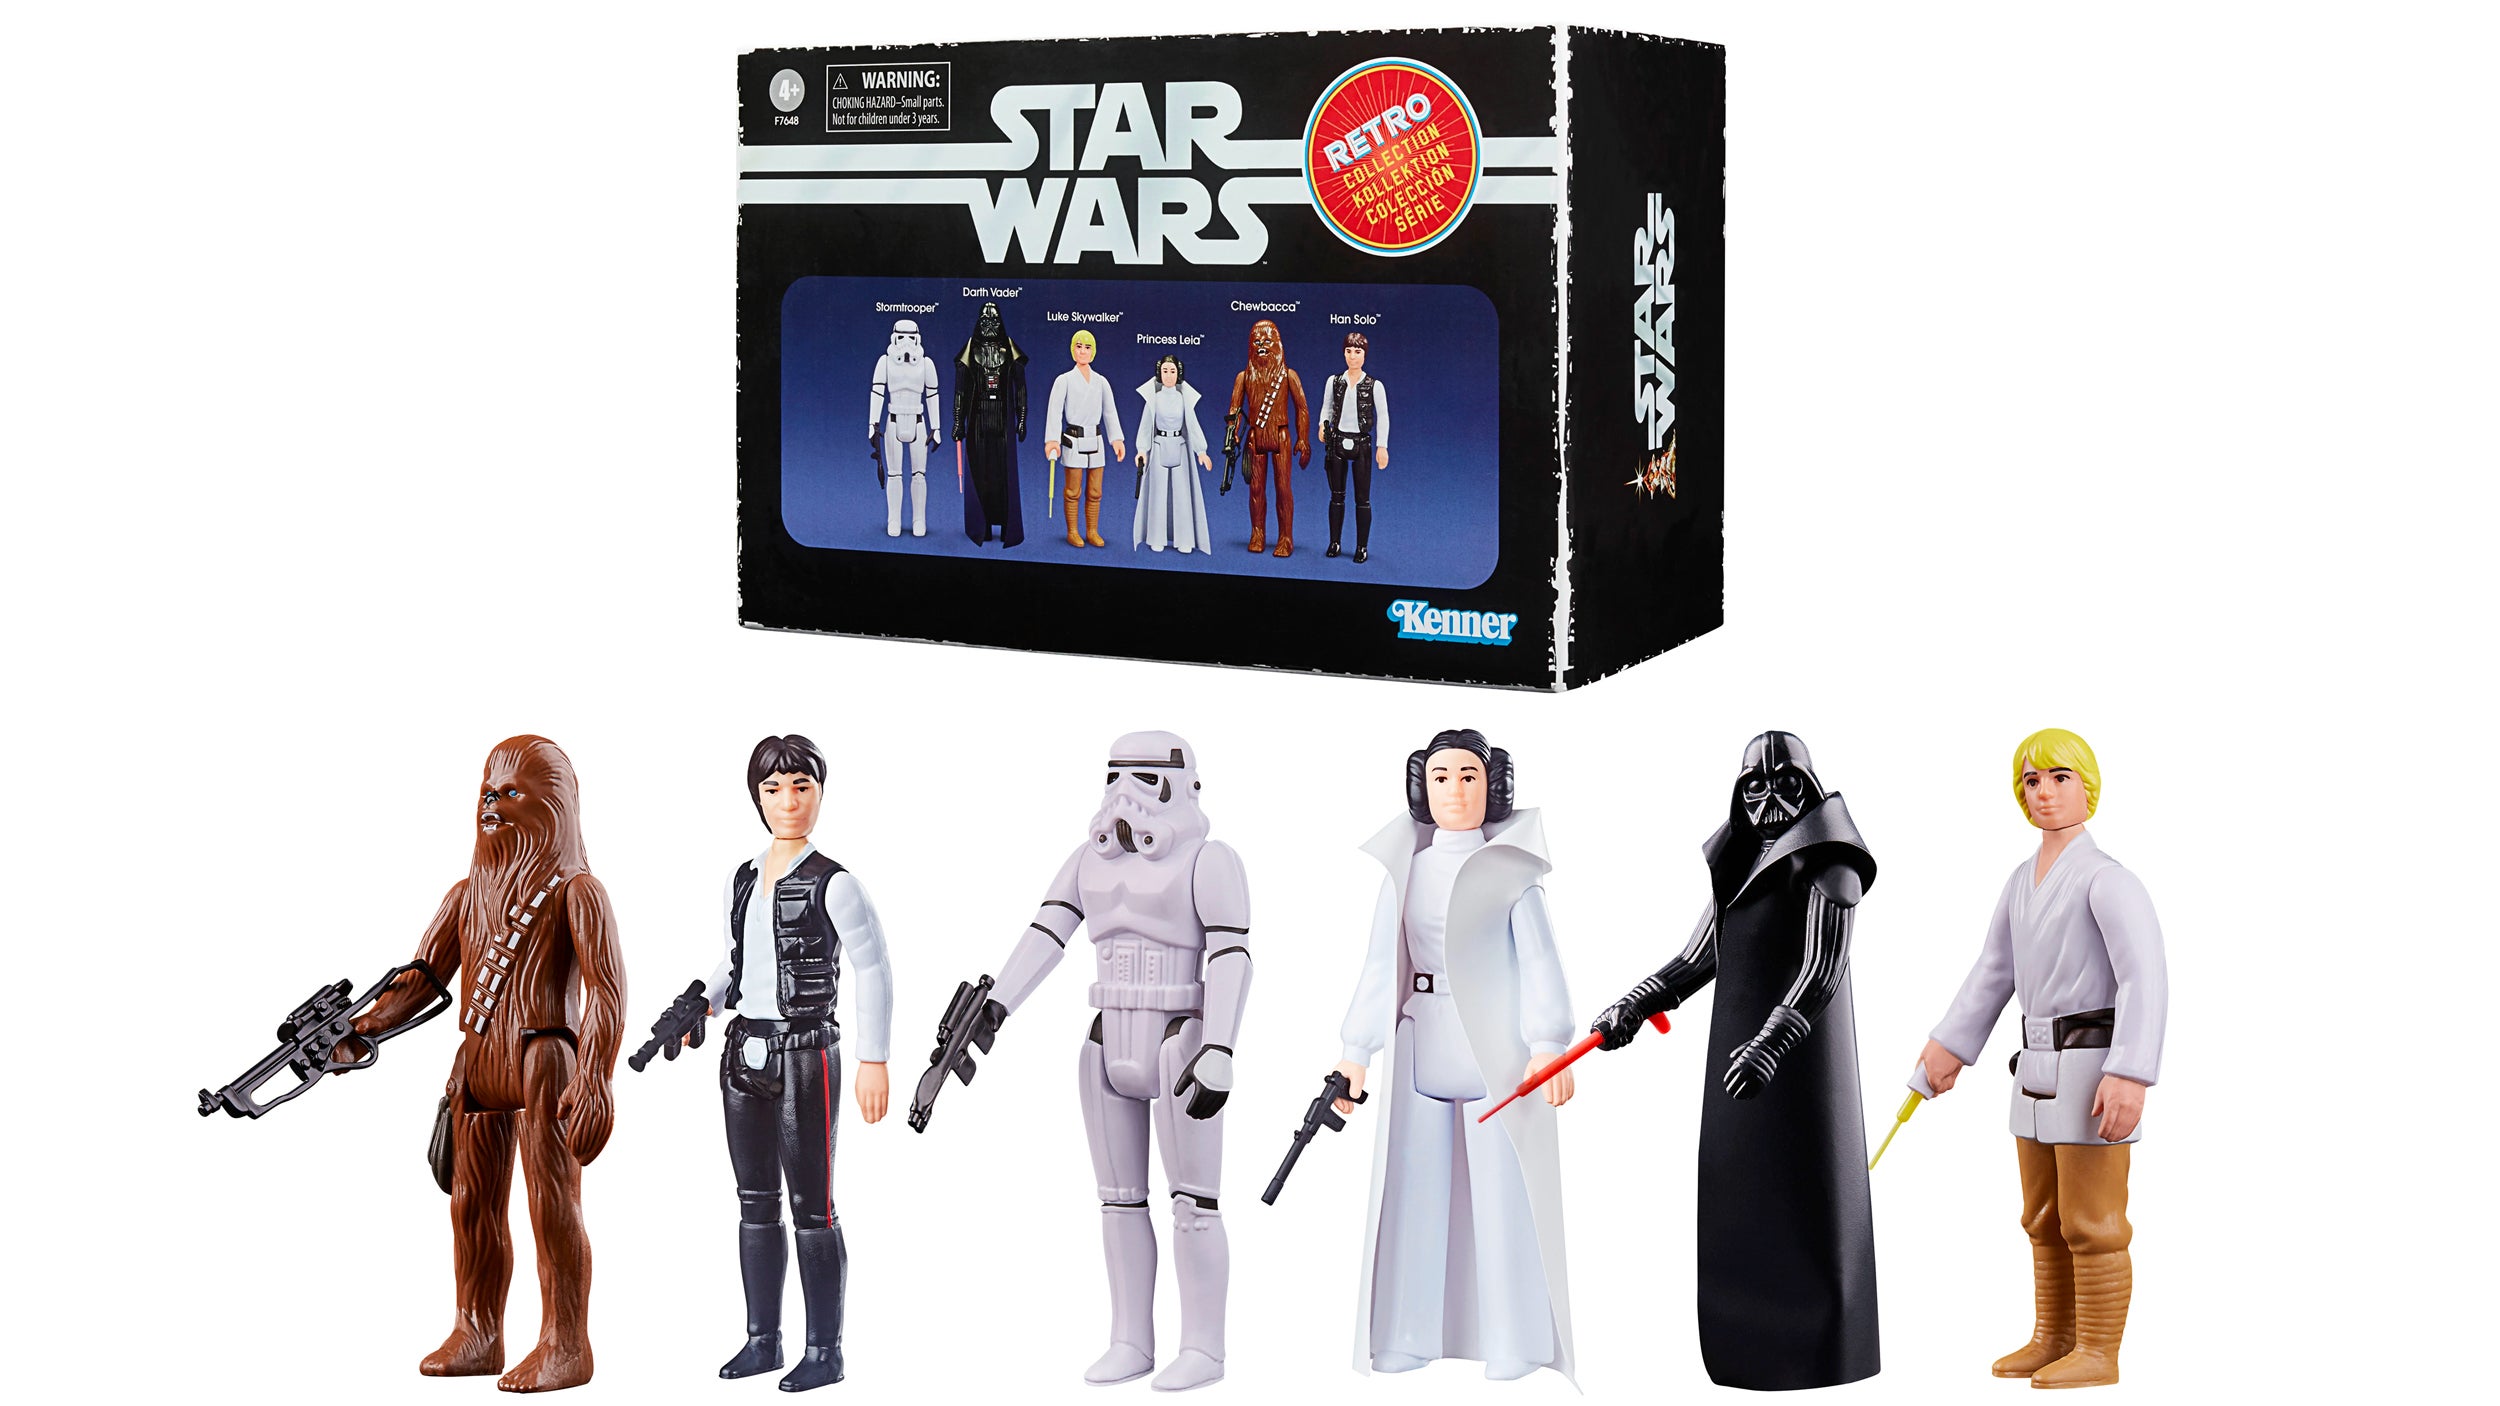 This Week’s Toy News Celebrates Those Wars Among the Stars